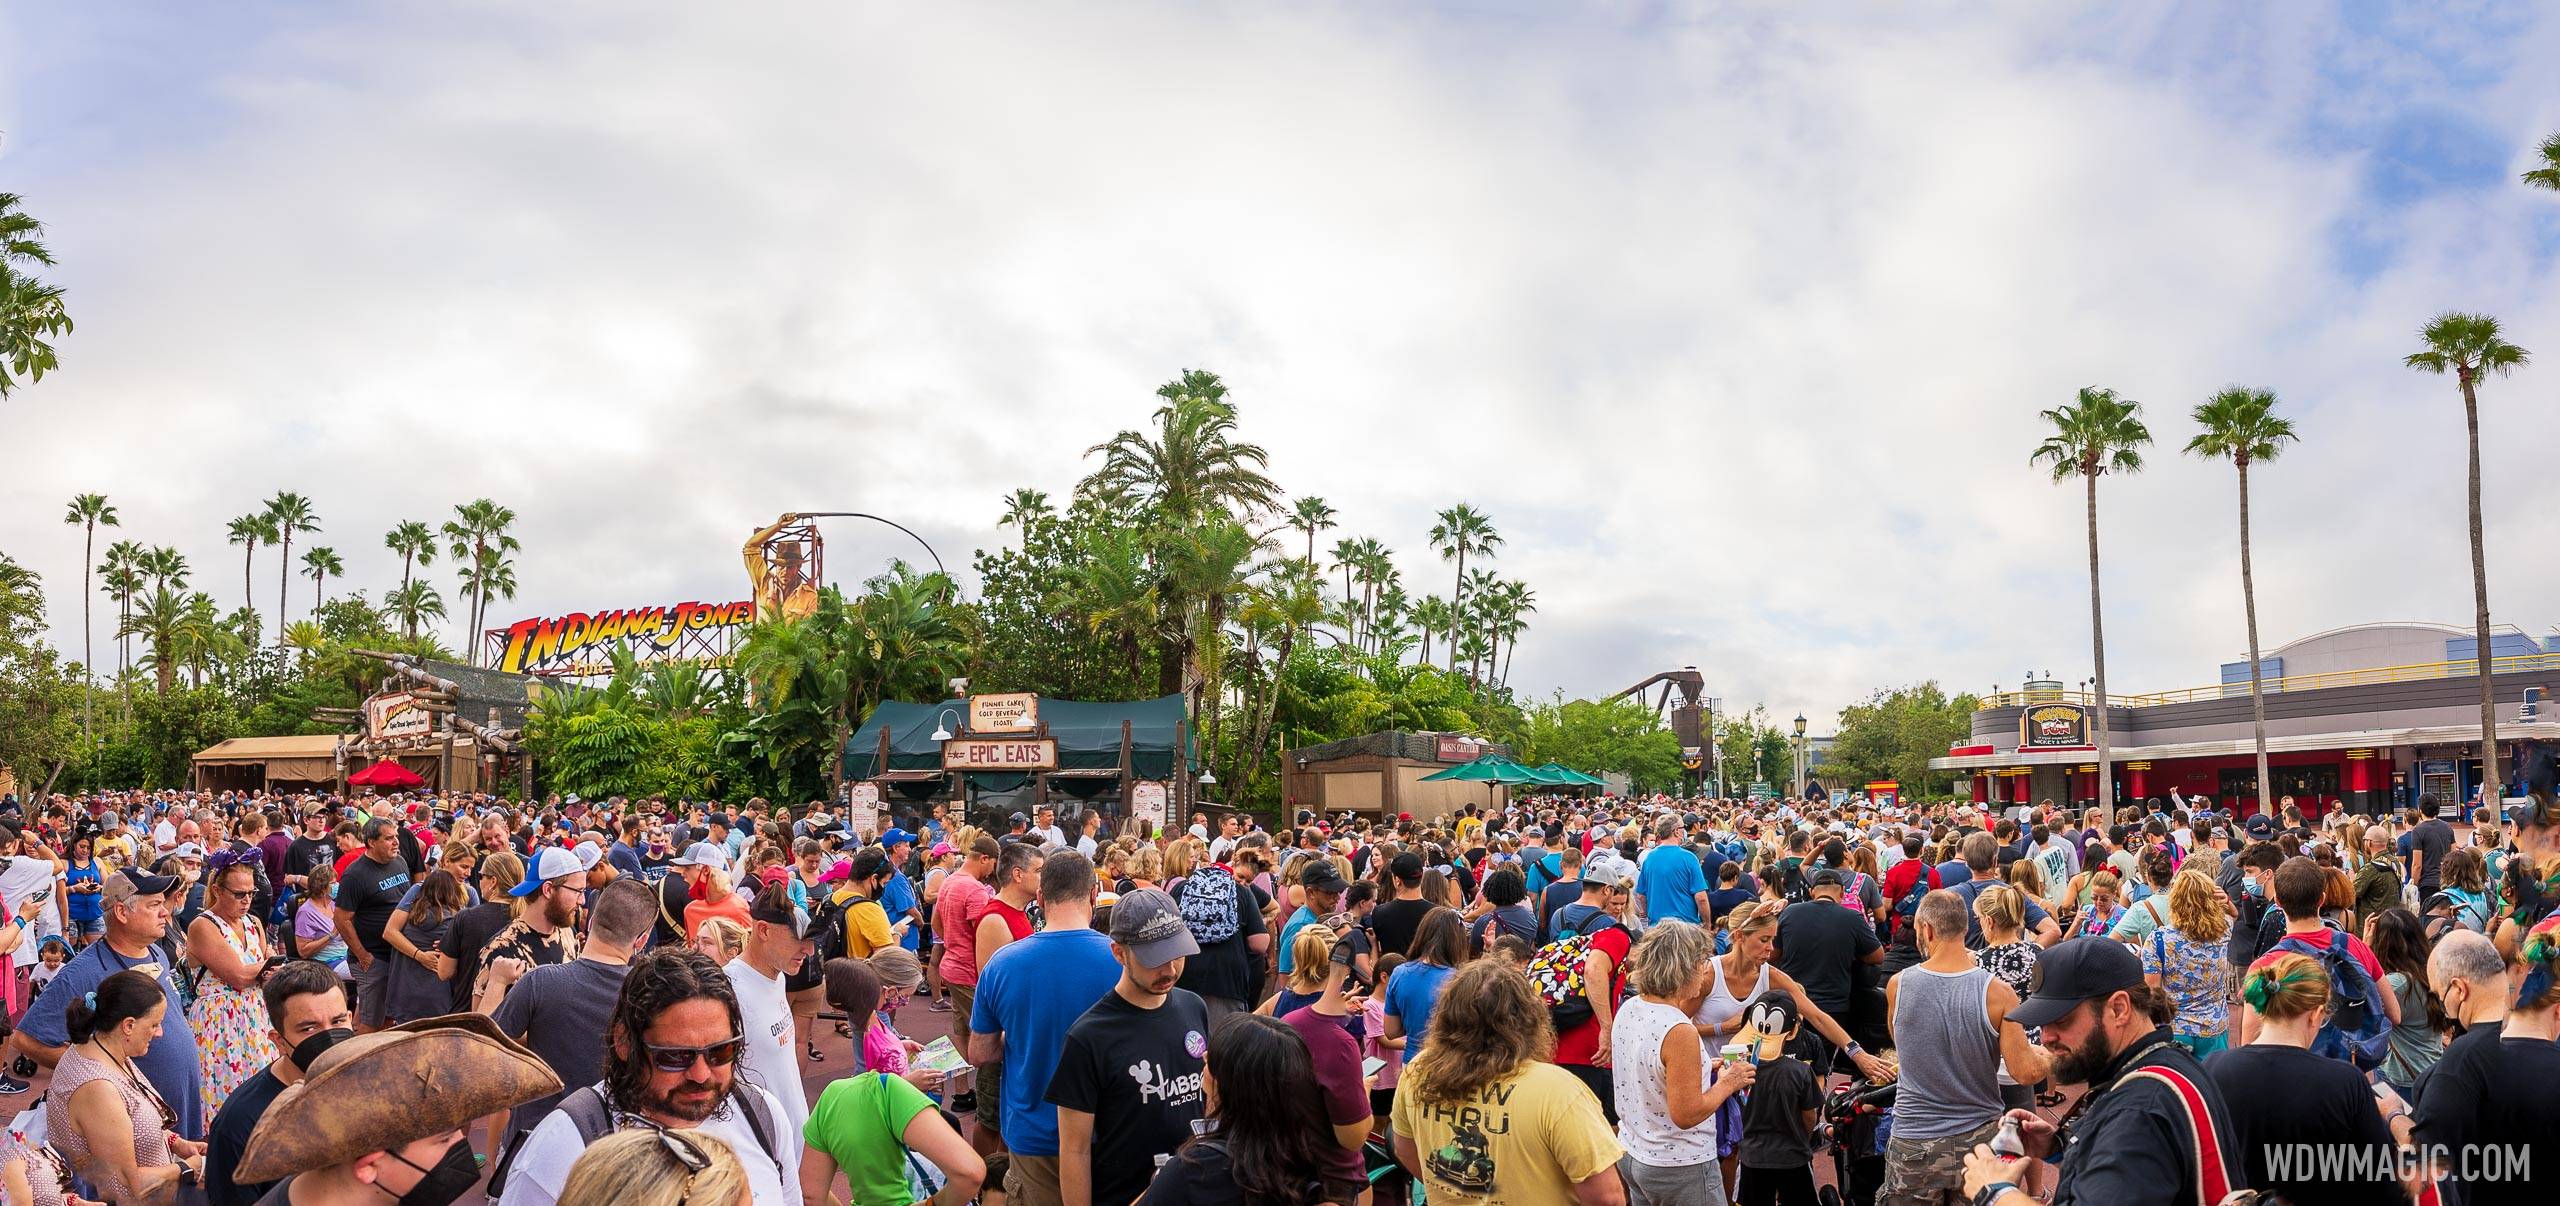 Everything you need to know about the new standby line at Walt Disney World's Star Wars Rise of the Resistance